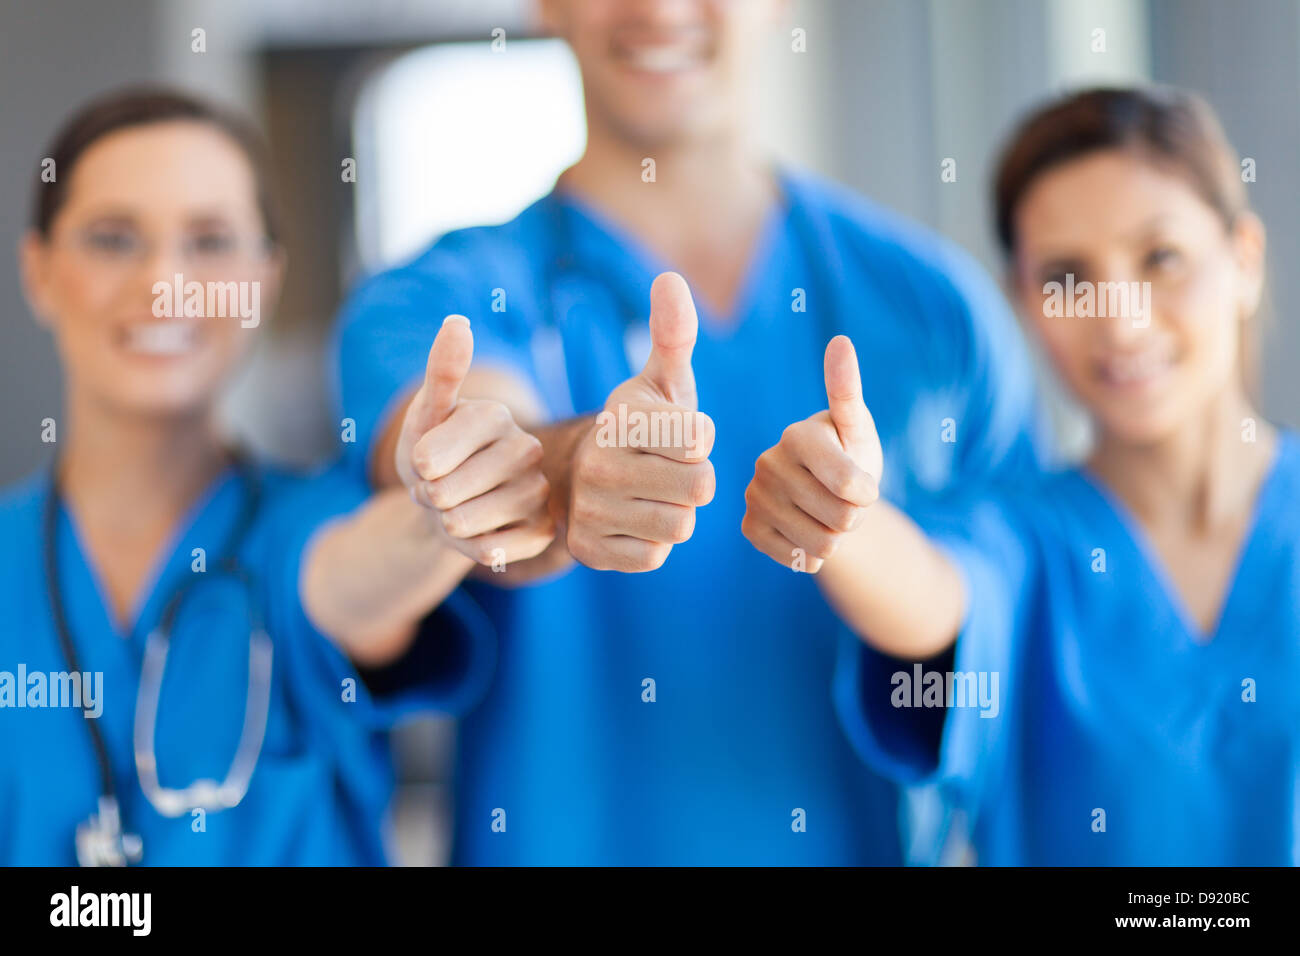 group of healthcare workers thumbs up Stock Photo